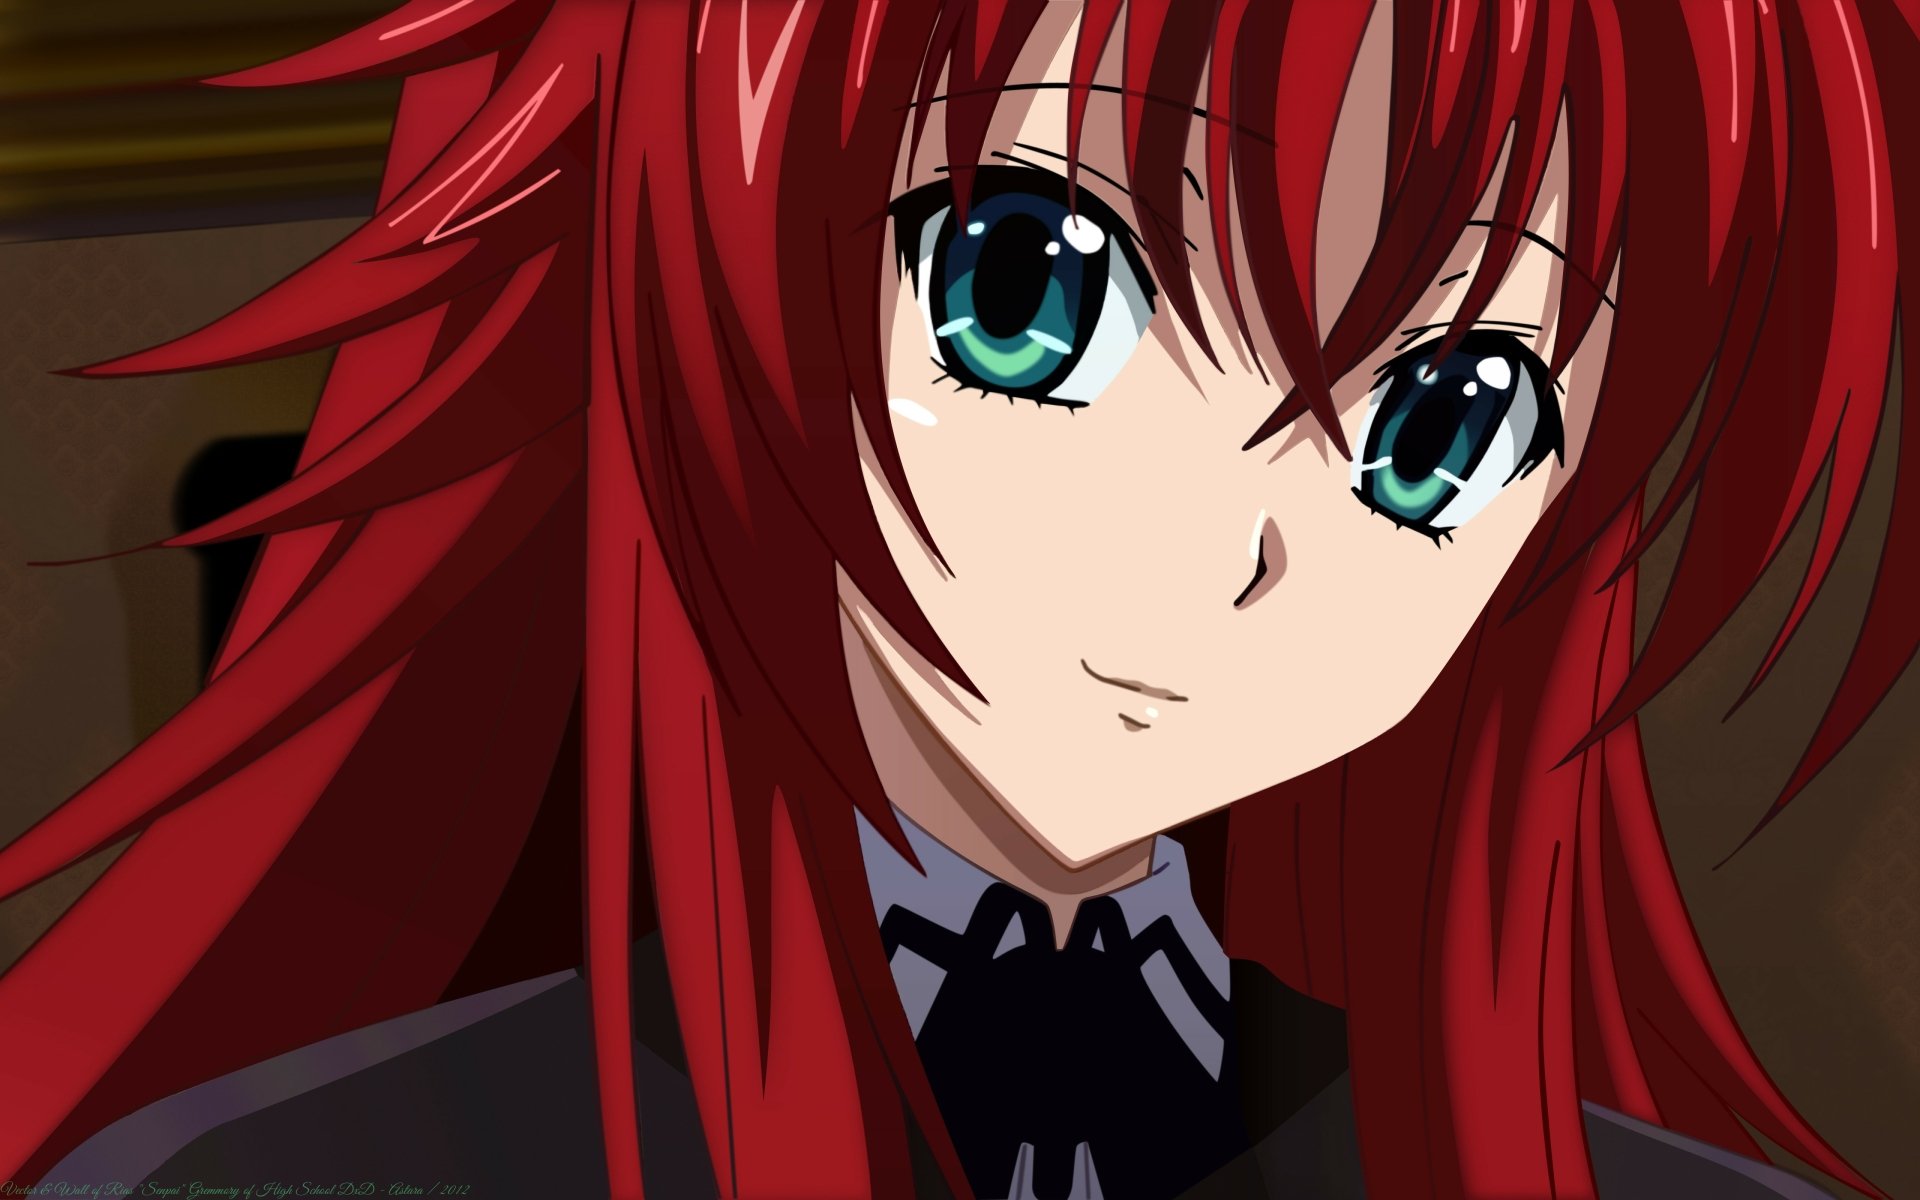 7. "Rias Gremory" from High School DxD - wide 4